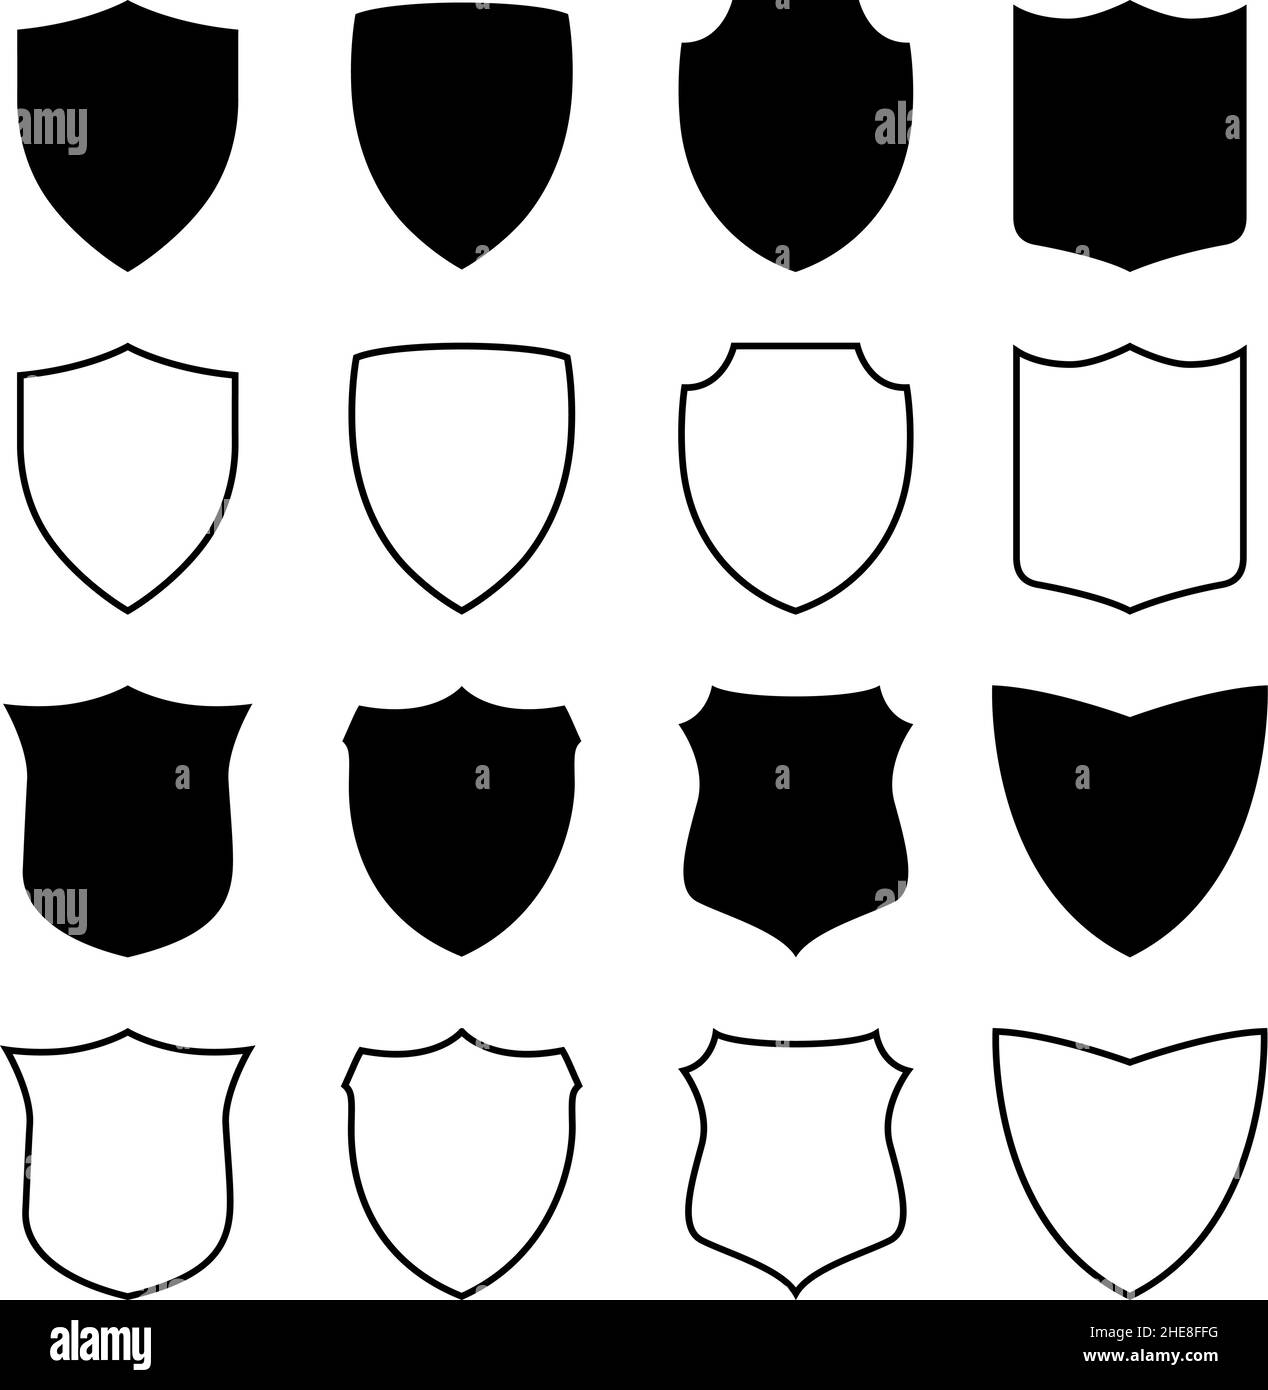 Set of silhouettes and outlines of shields, vector illustration Stock Vector